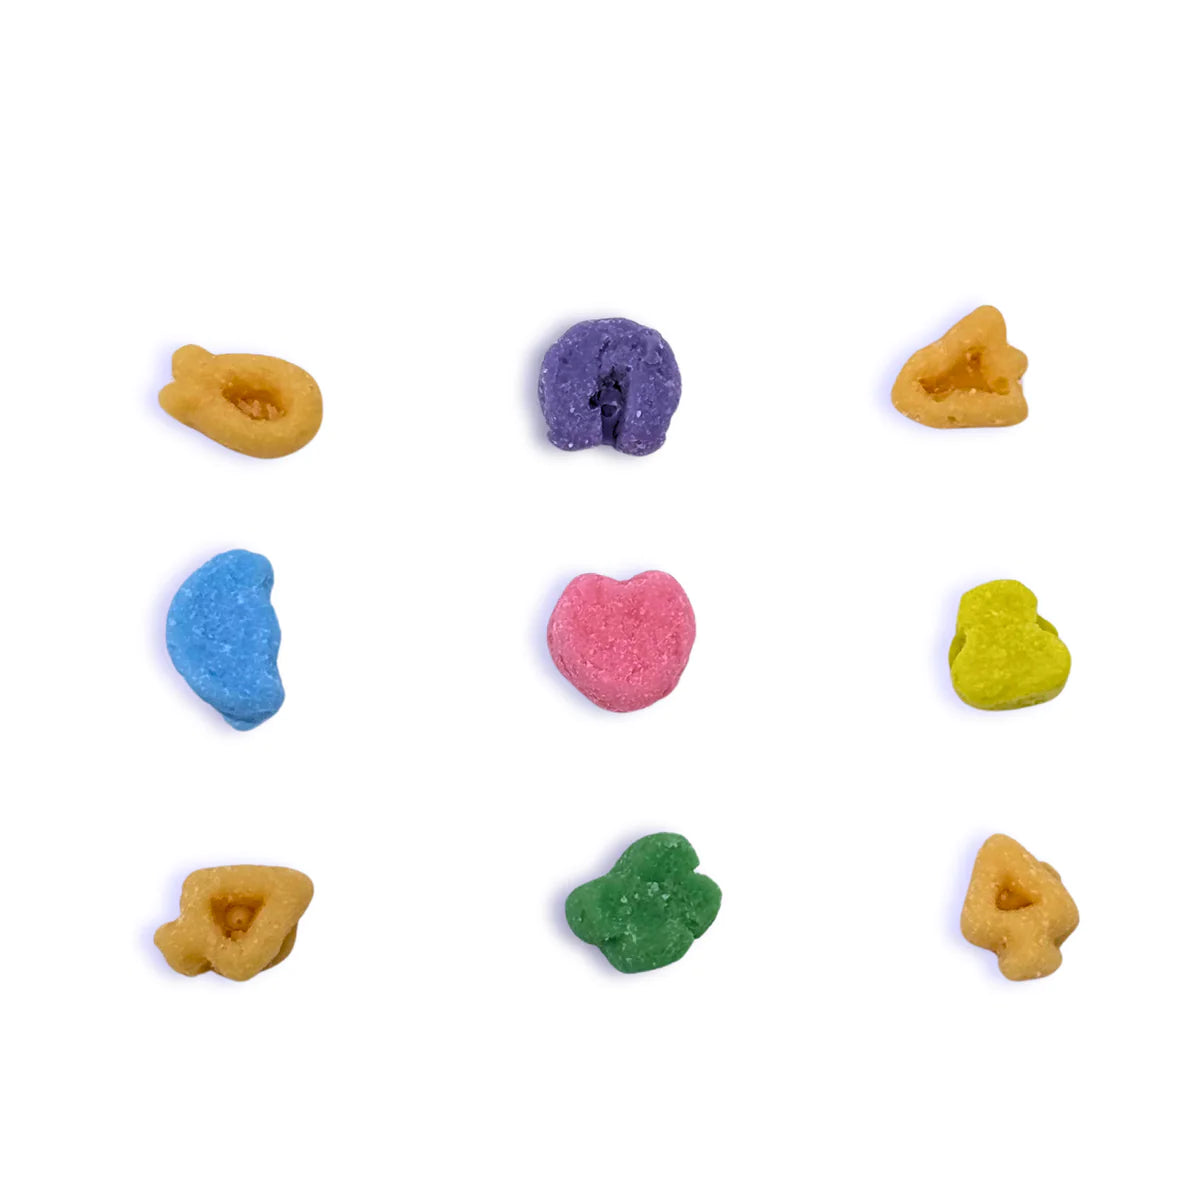 Shamrock Surprise (Charms) Cereal Wax Melts